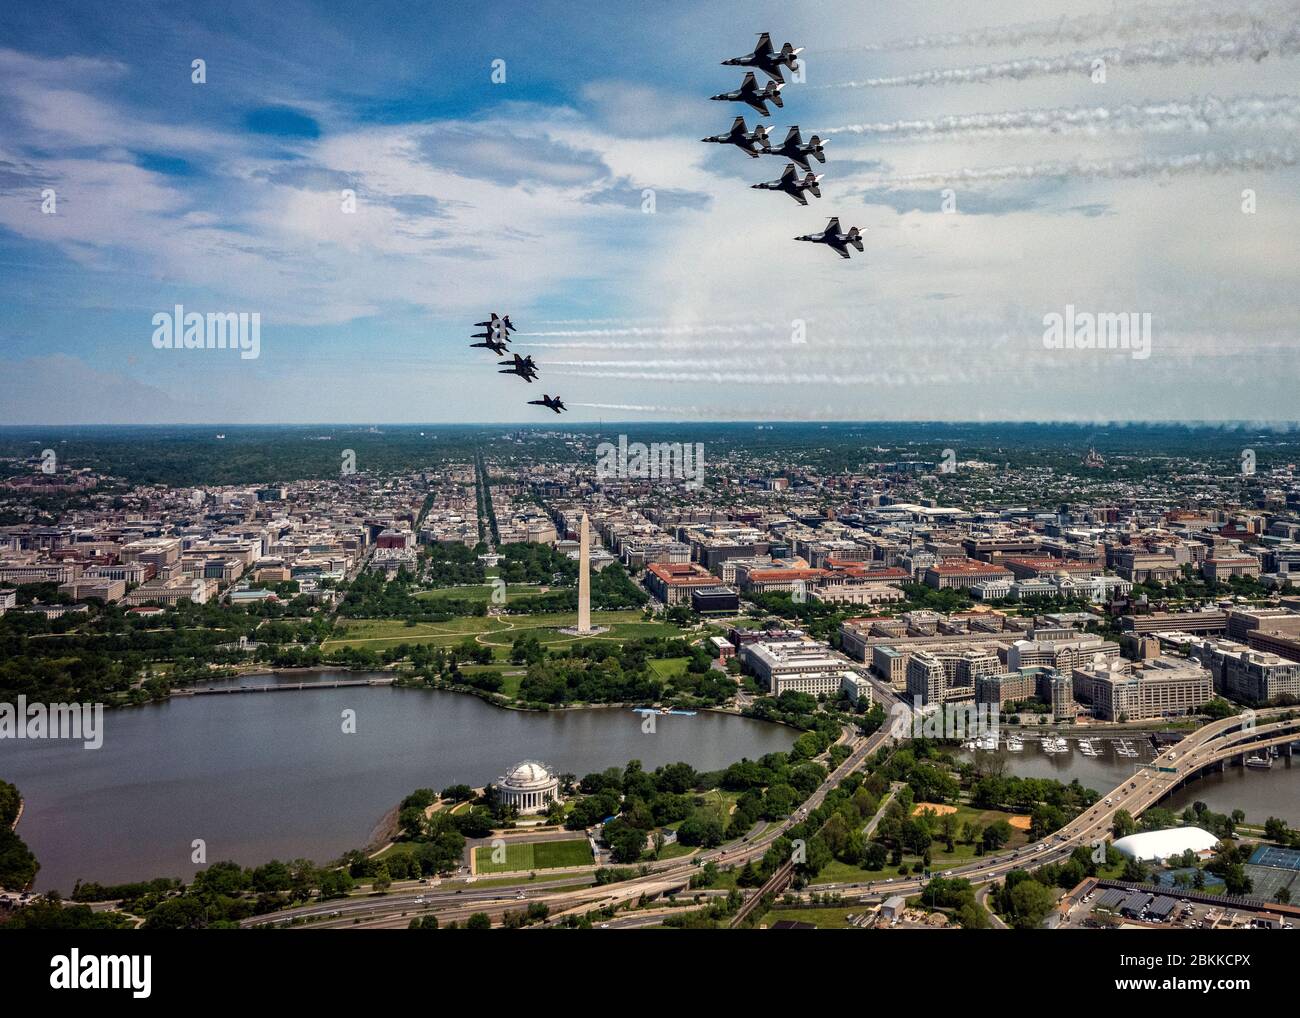 The U.S. Air Force Air Demonstration Squadron, the Thunderbirds, and the Navy Blue Angels, below, fly in formation over the Washington Monument and Jefferson Memorial, during the America Strong flyover May 2, 2020 in Washington, D.C. America Strong is a salute from the Navy and Air Force to recognize healthcare workers, first responders, and other essential personnel in a show of national solidarity during the COVID-19 pandemic. Stock Photo